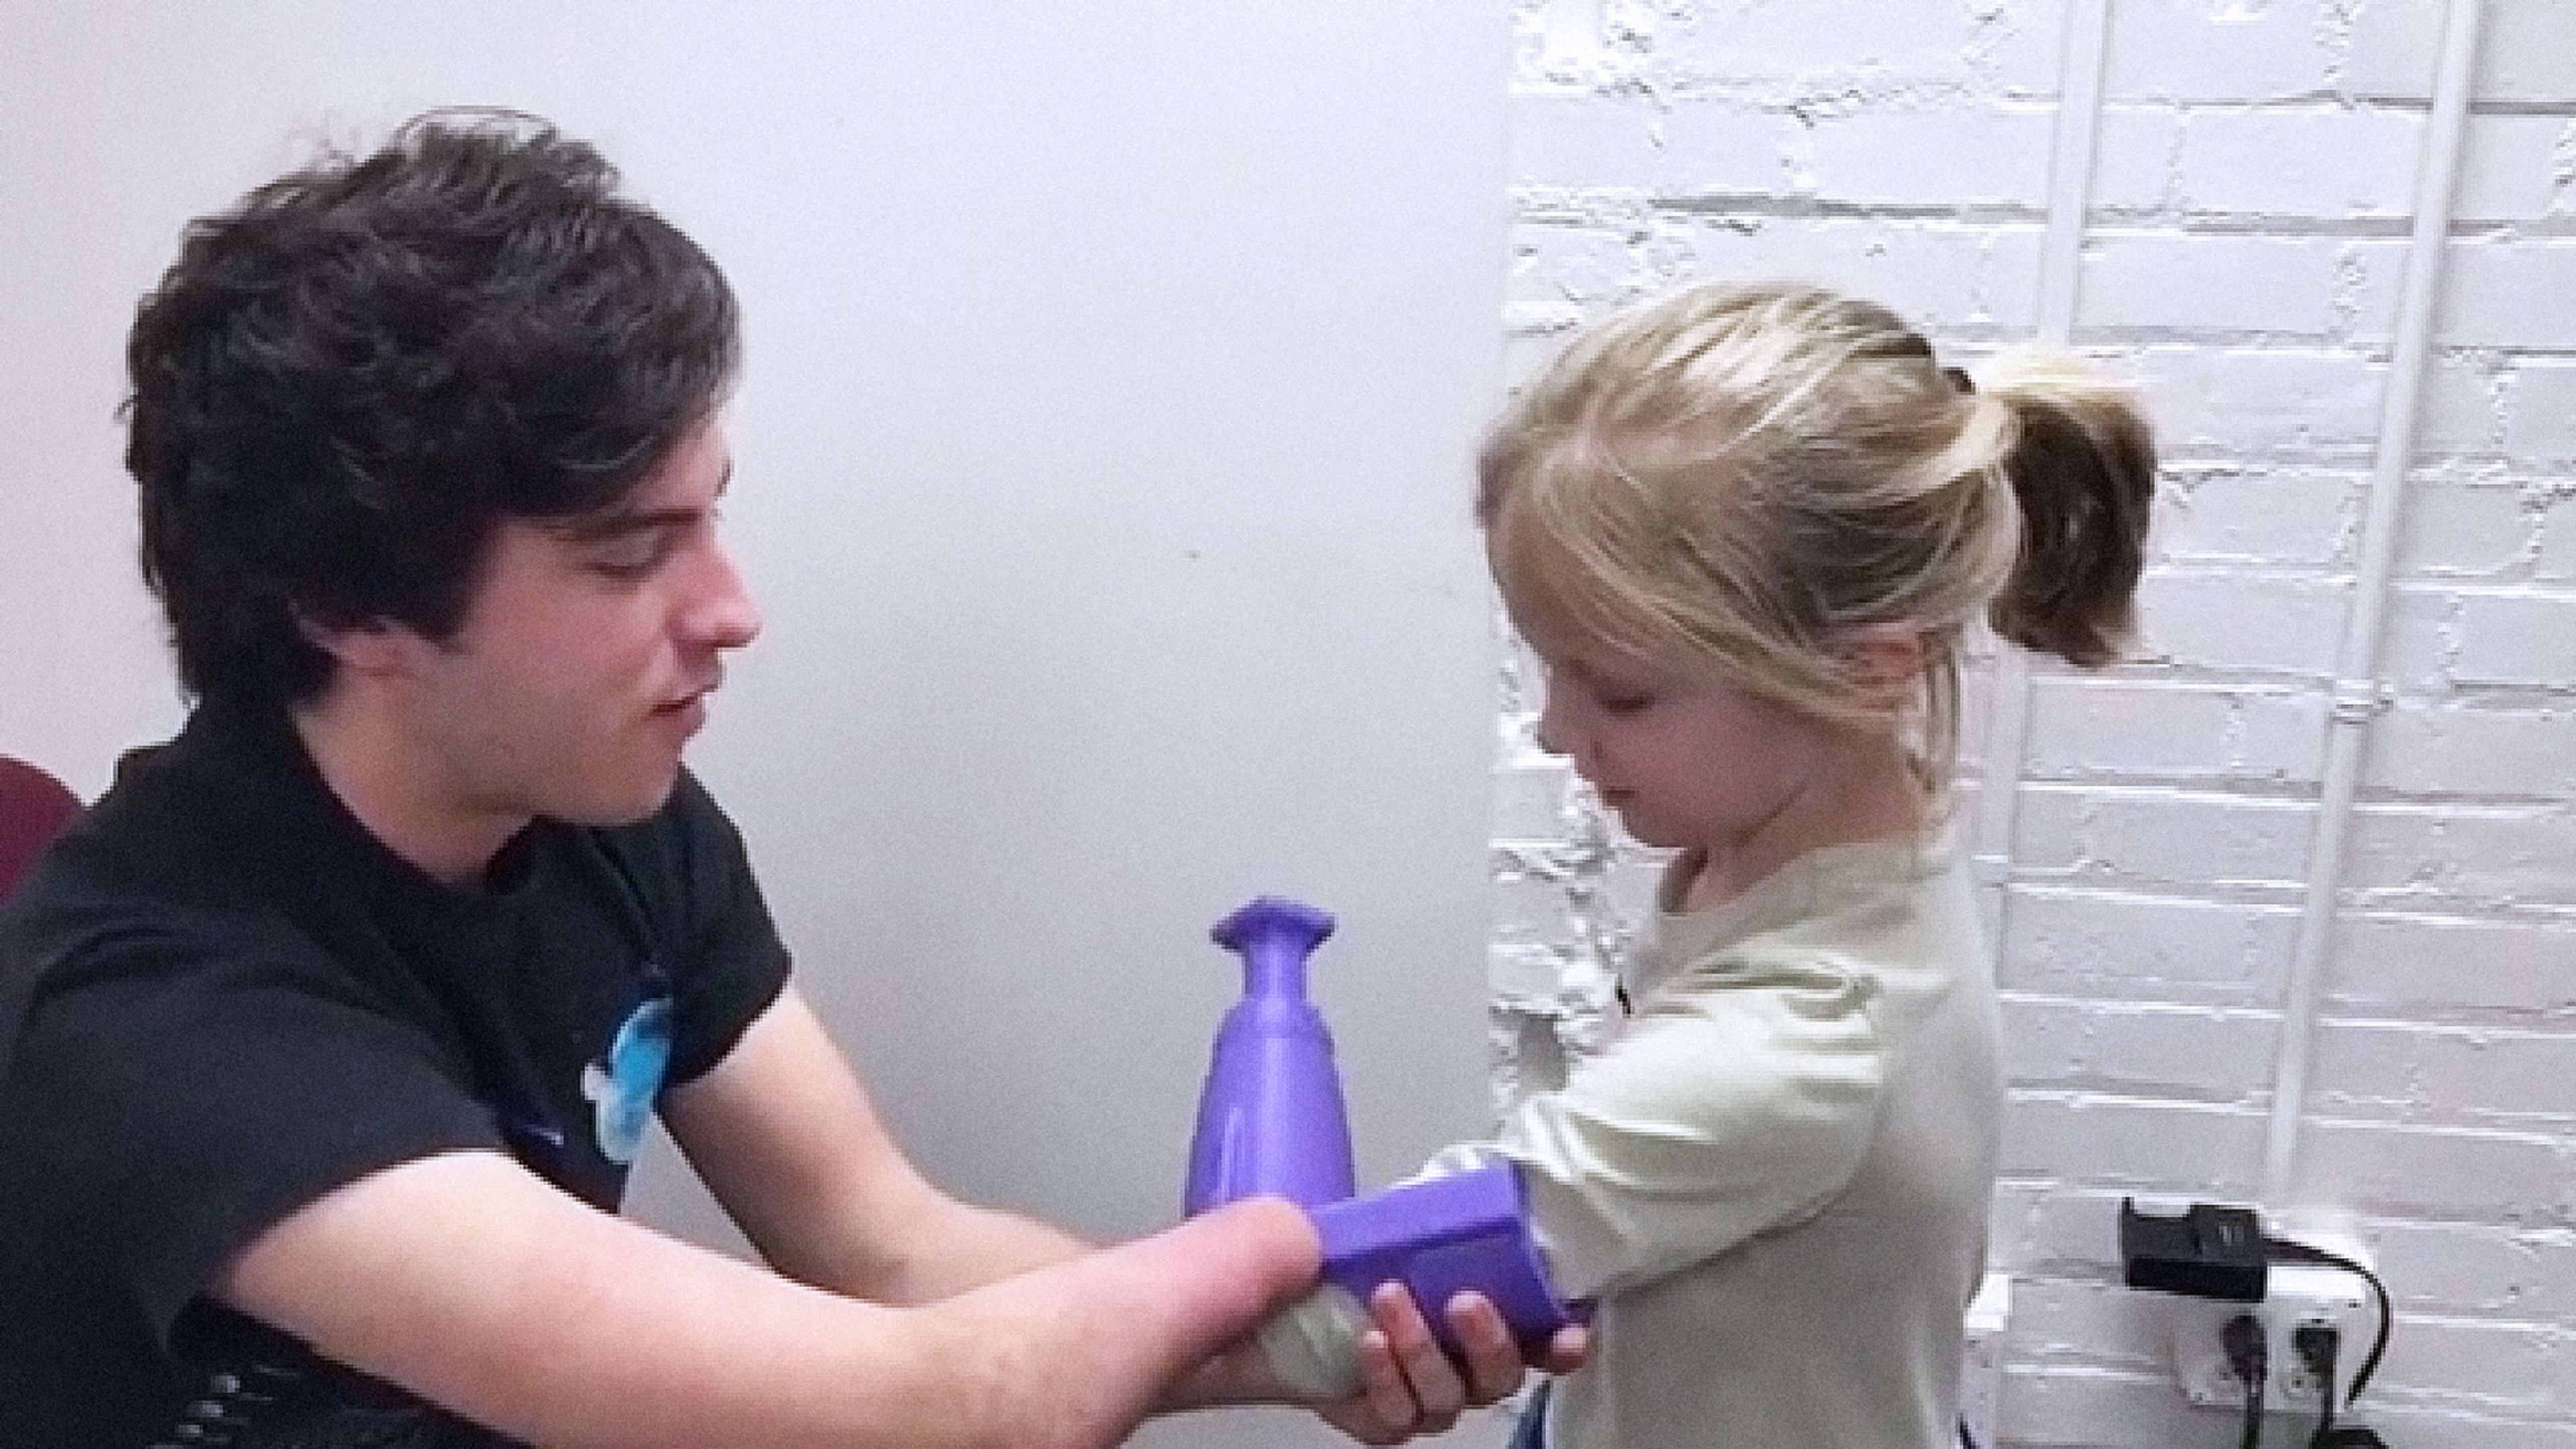 This 18-Year-Old Makes Innovative Prosthetics From Recycled Plastic